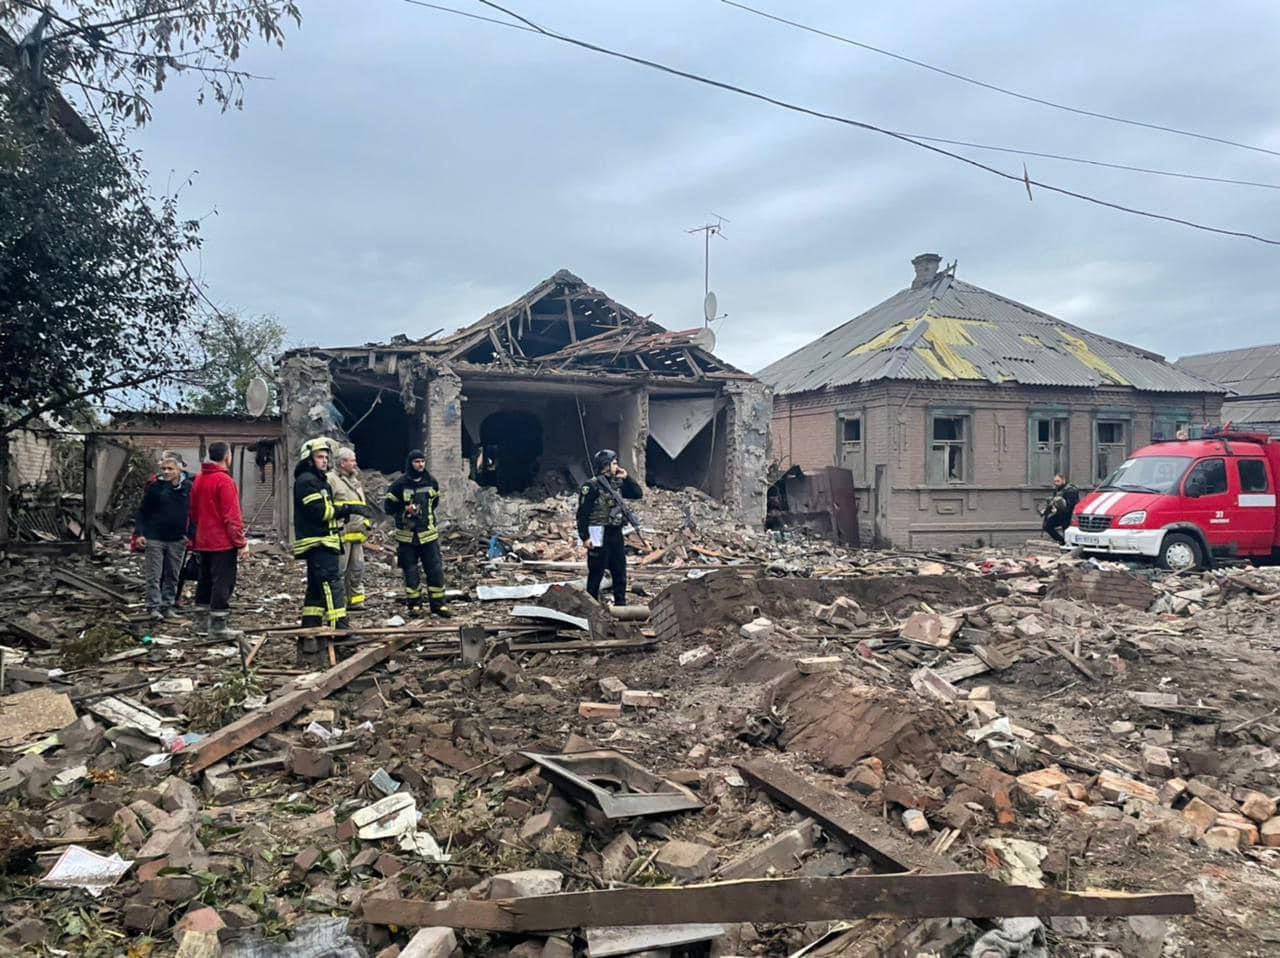 The aftermath of the deadly missile attack on Slovyansk that killed 25-year-old Kateryna